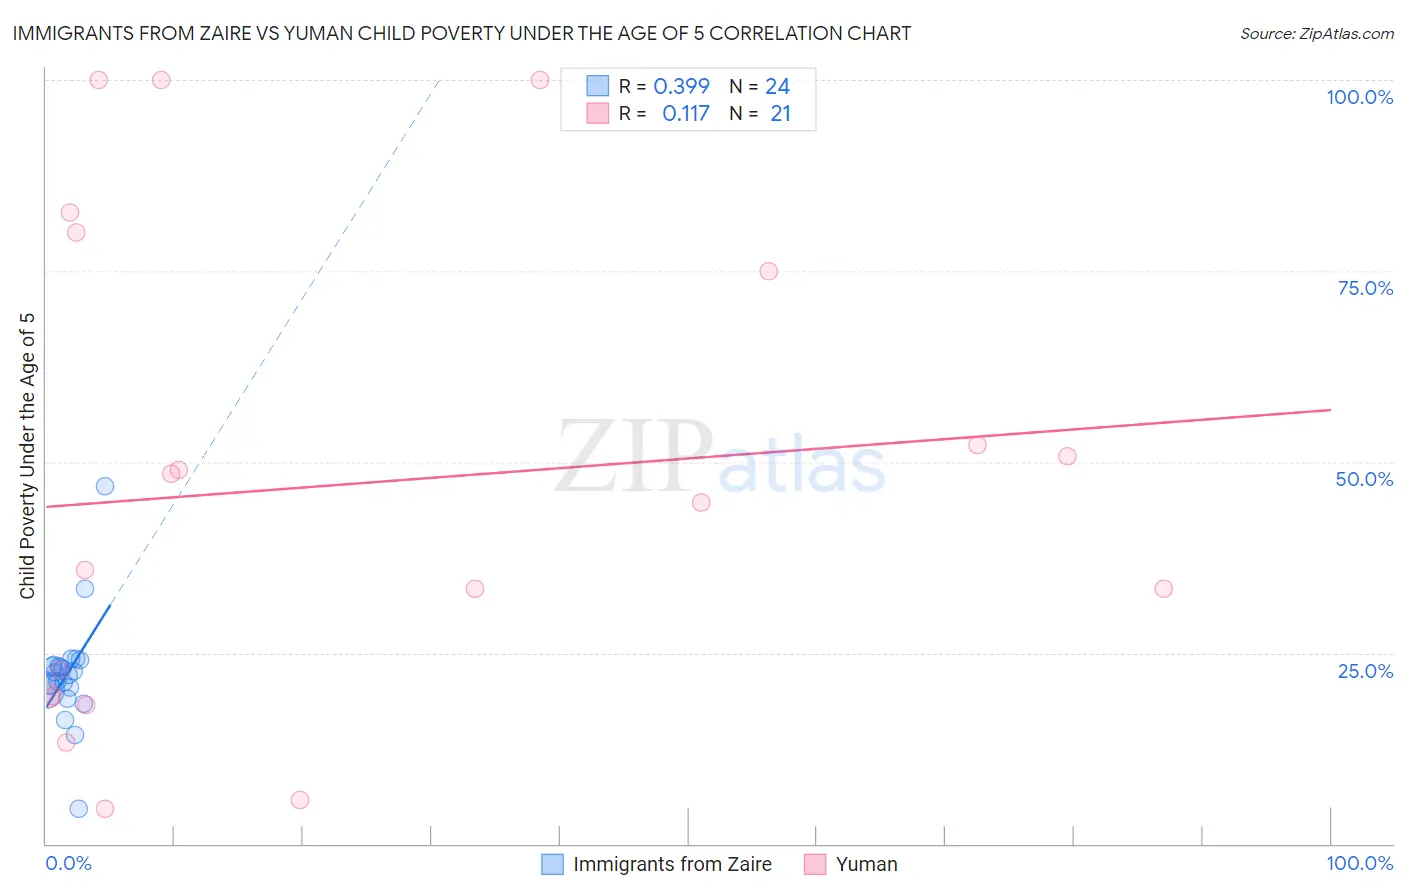 Immigrants from Zaire vs Yuman Child Poverty Under the Age of 5